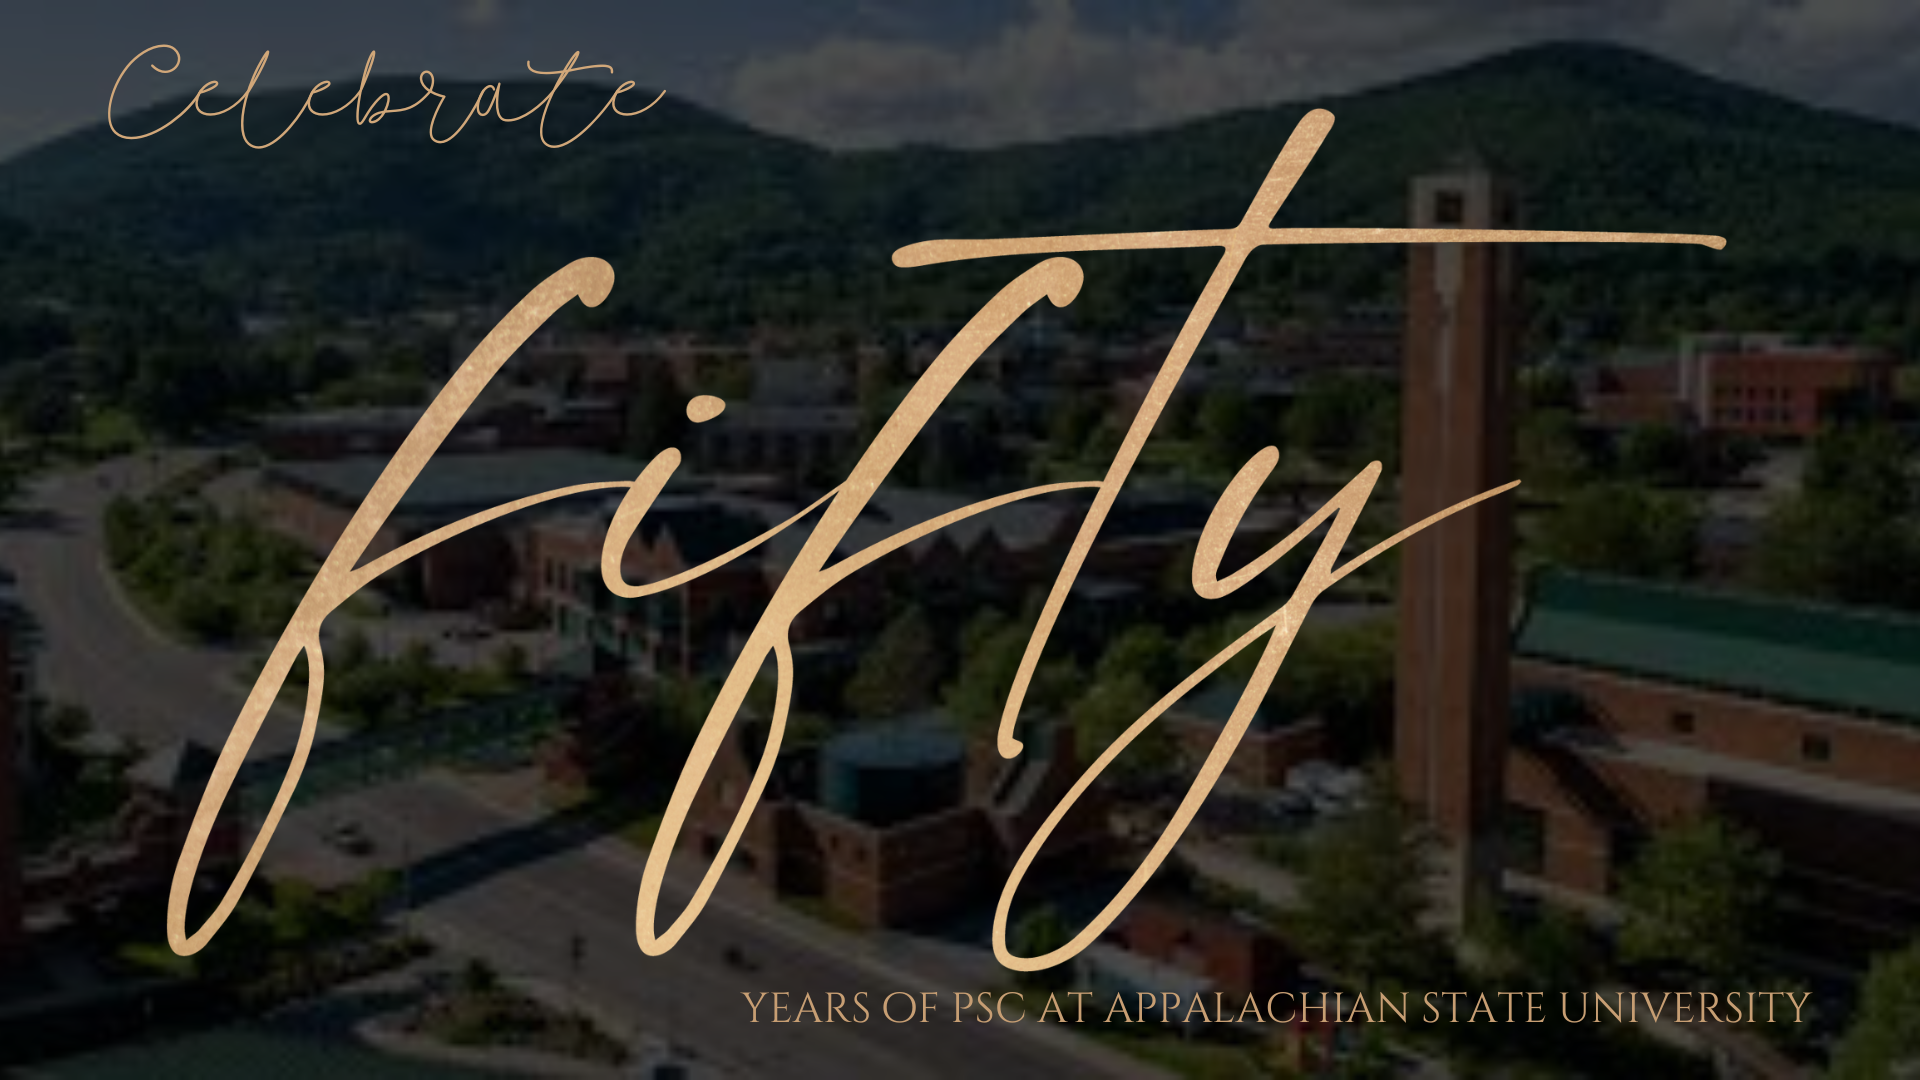 a graphic with a picture of the campus in the background reading "Celebrate fifty years of PSC at Appalachian State University"